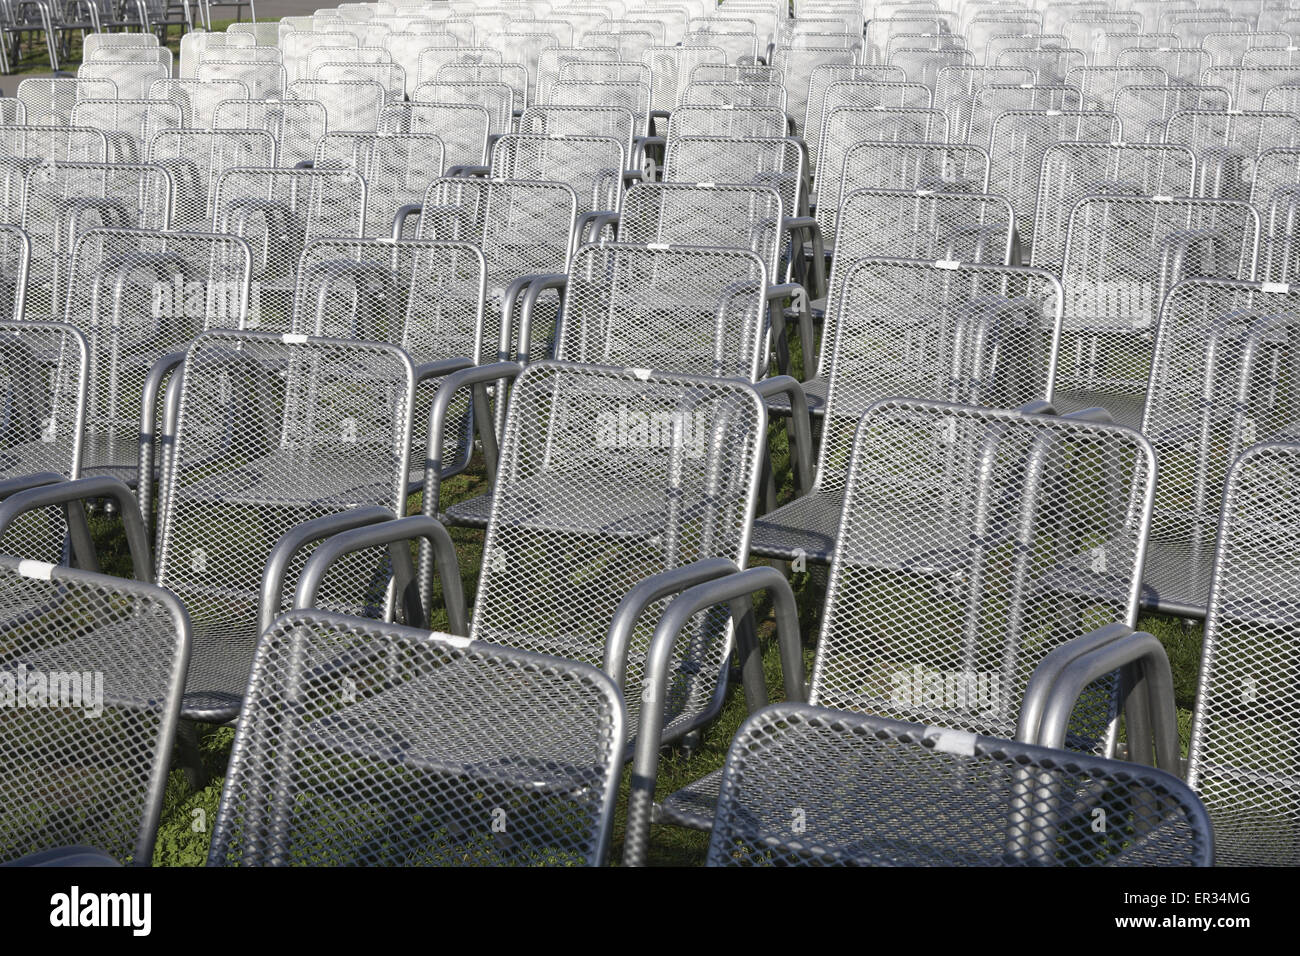 Germany, Leverkusen, chairs at the Neuland-Park.  Deutschland, Leverkusen, Stuehle im Neuland-Park. Stock Photo